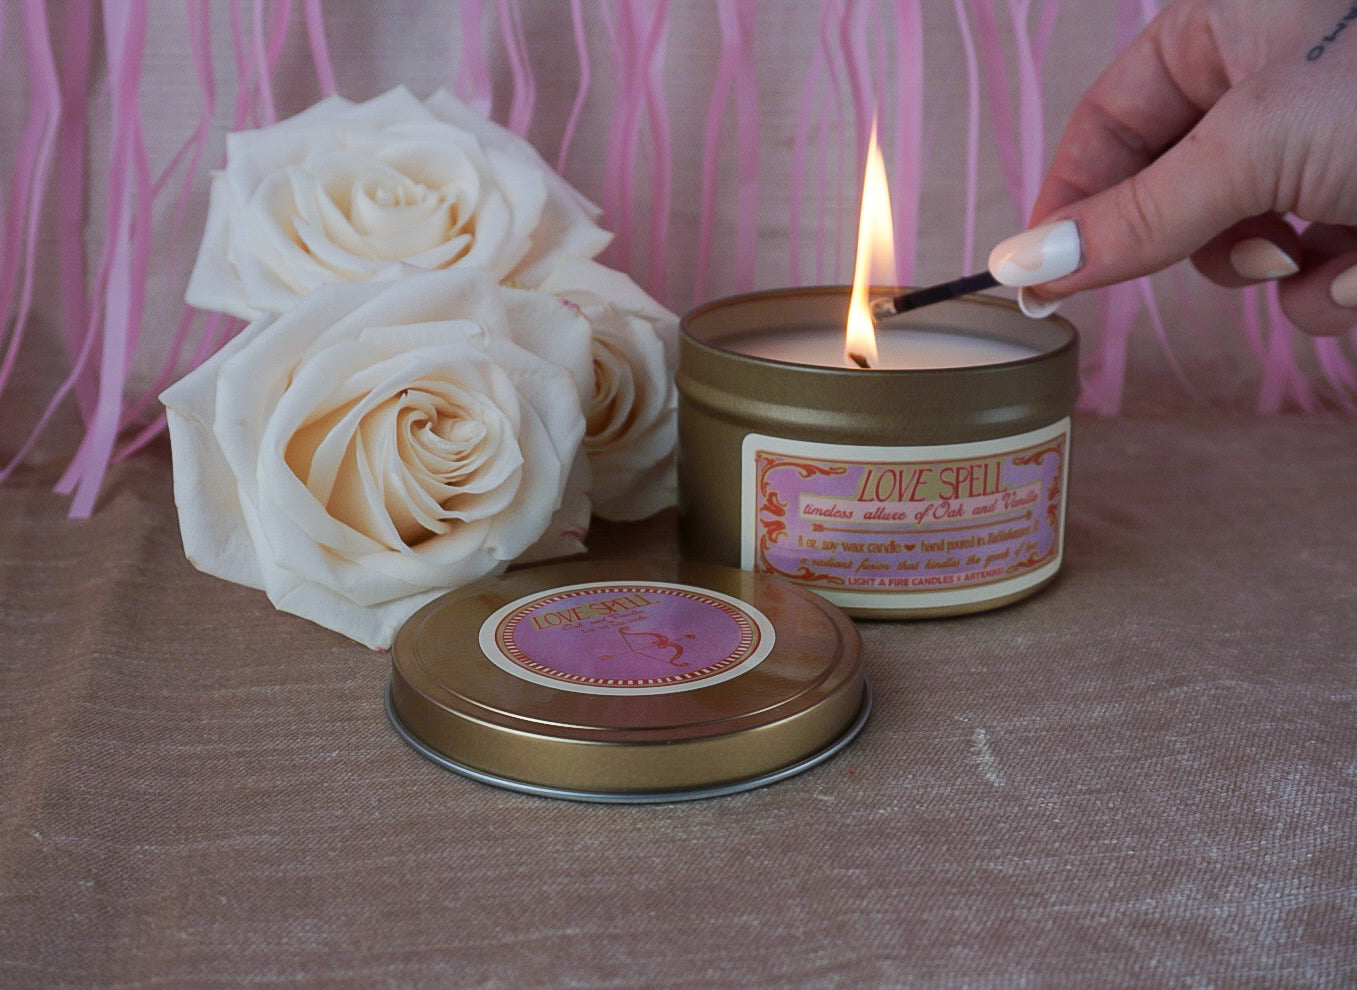 "Love Spell" 8 oz. Soy Wax Candle: Oak and Vanilla